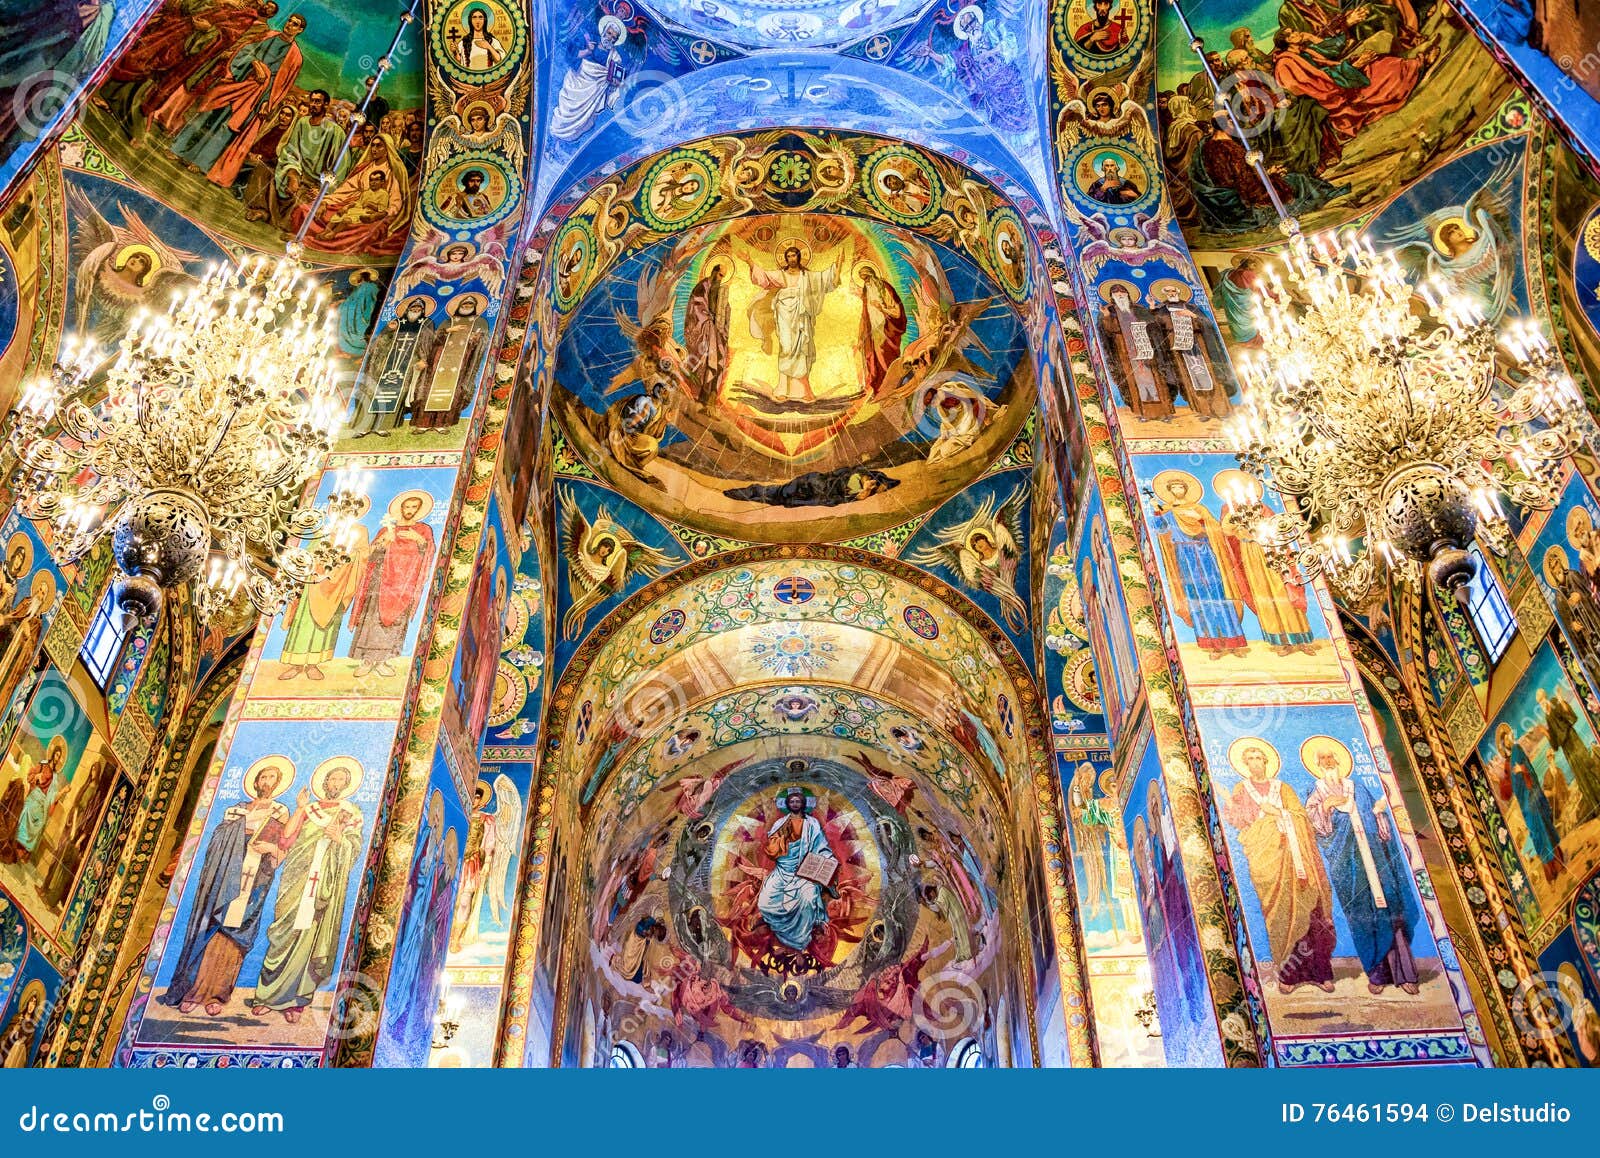 interior of the church of the savior on spilled blood, st petersburg russia